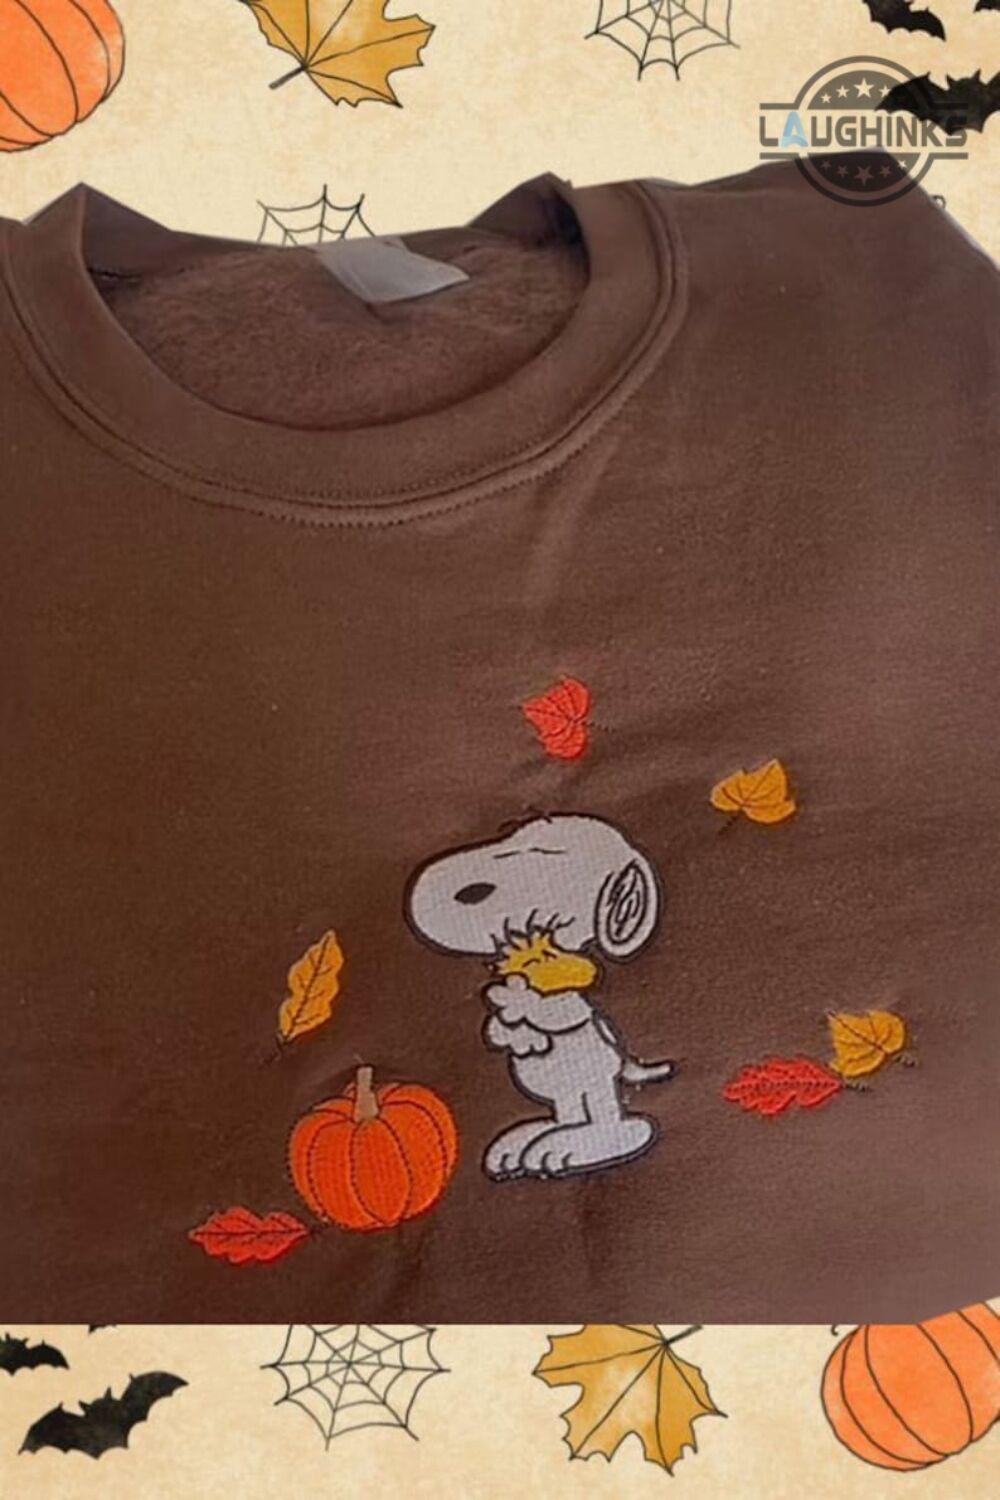 snoopy sweatshirt embroidered snoopy fall crewneck tshirt embroidered snoopy hoodie snoopy halloween t shirts snoopy september snoopy hug woodstock fall leaves laughinks.com 1